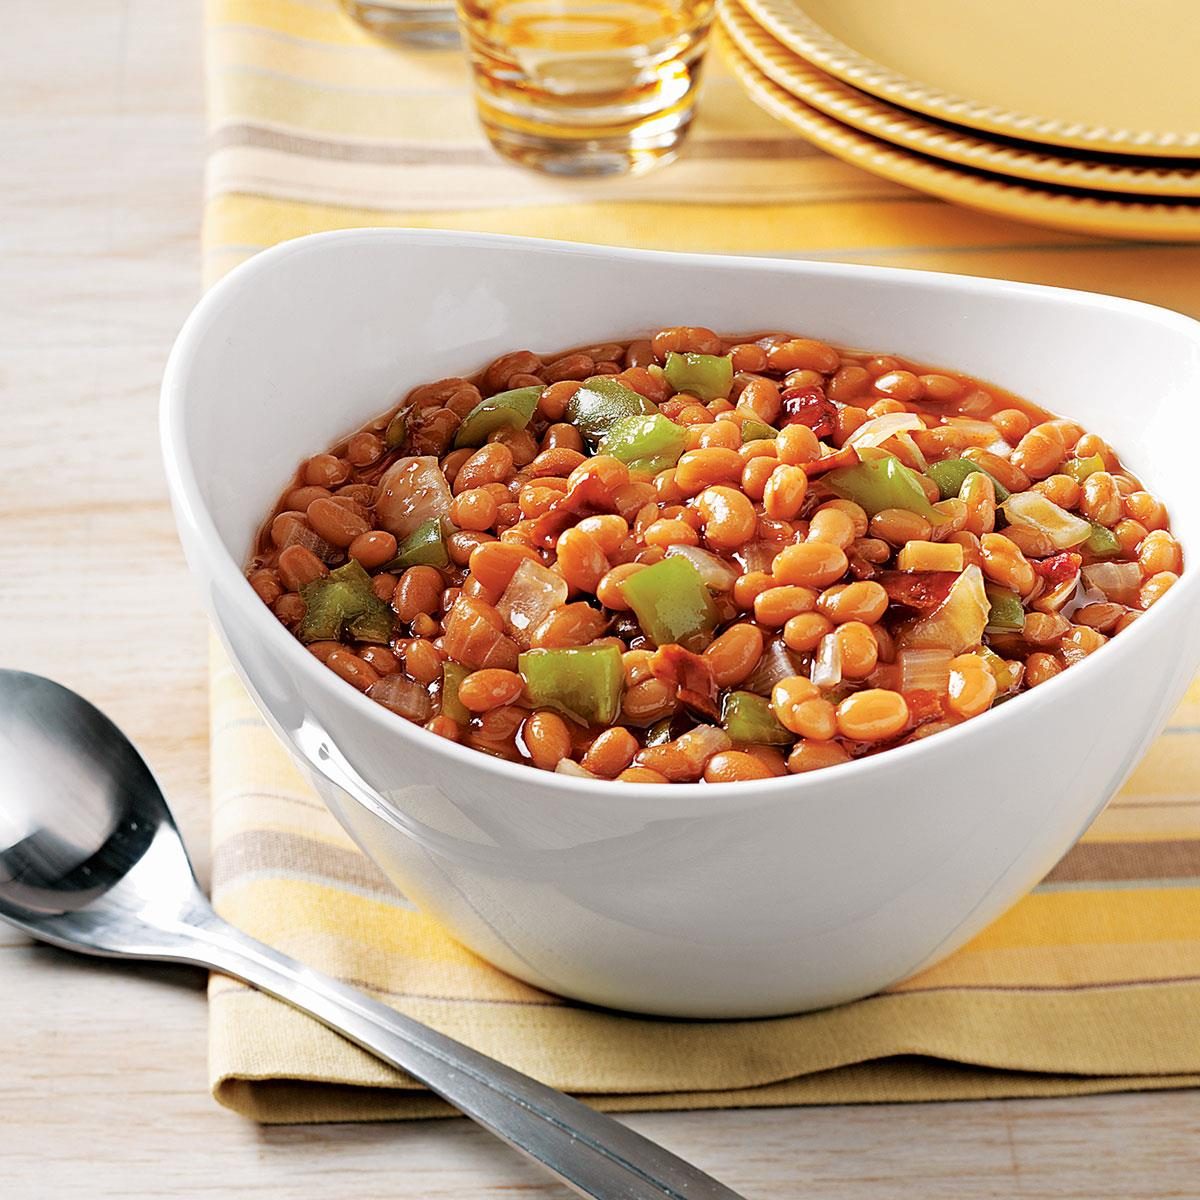 Baked Beans With Bacon Exps49200 Rds1997292a06 30 3bc Rms 2